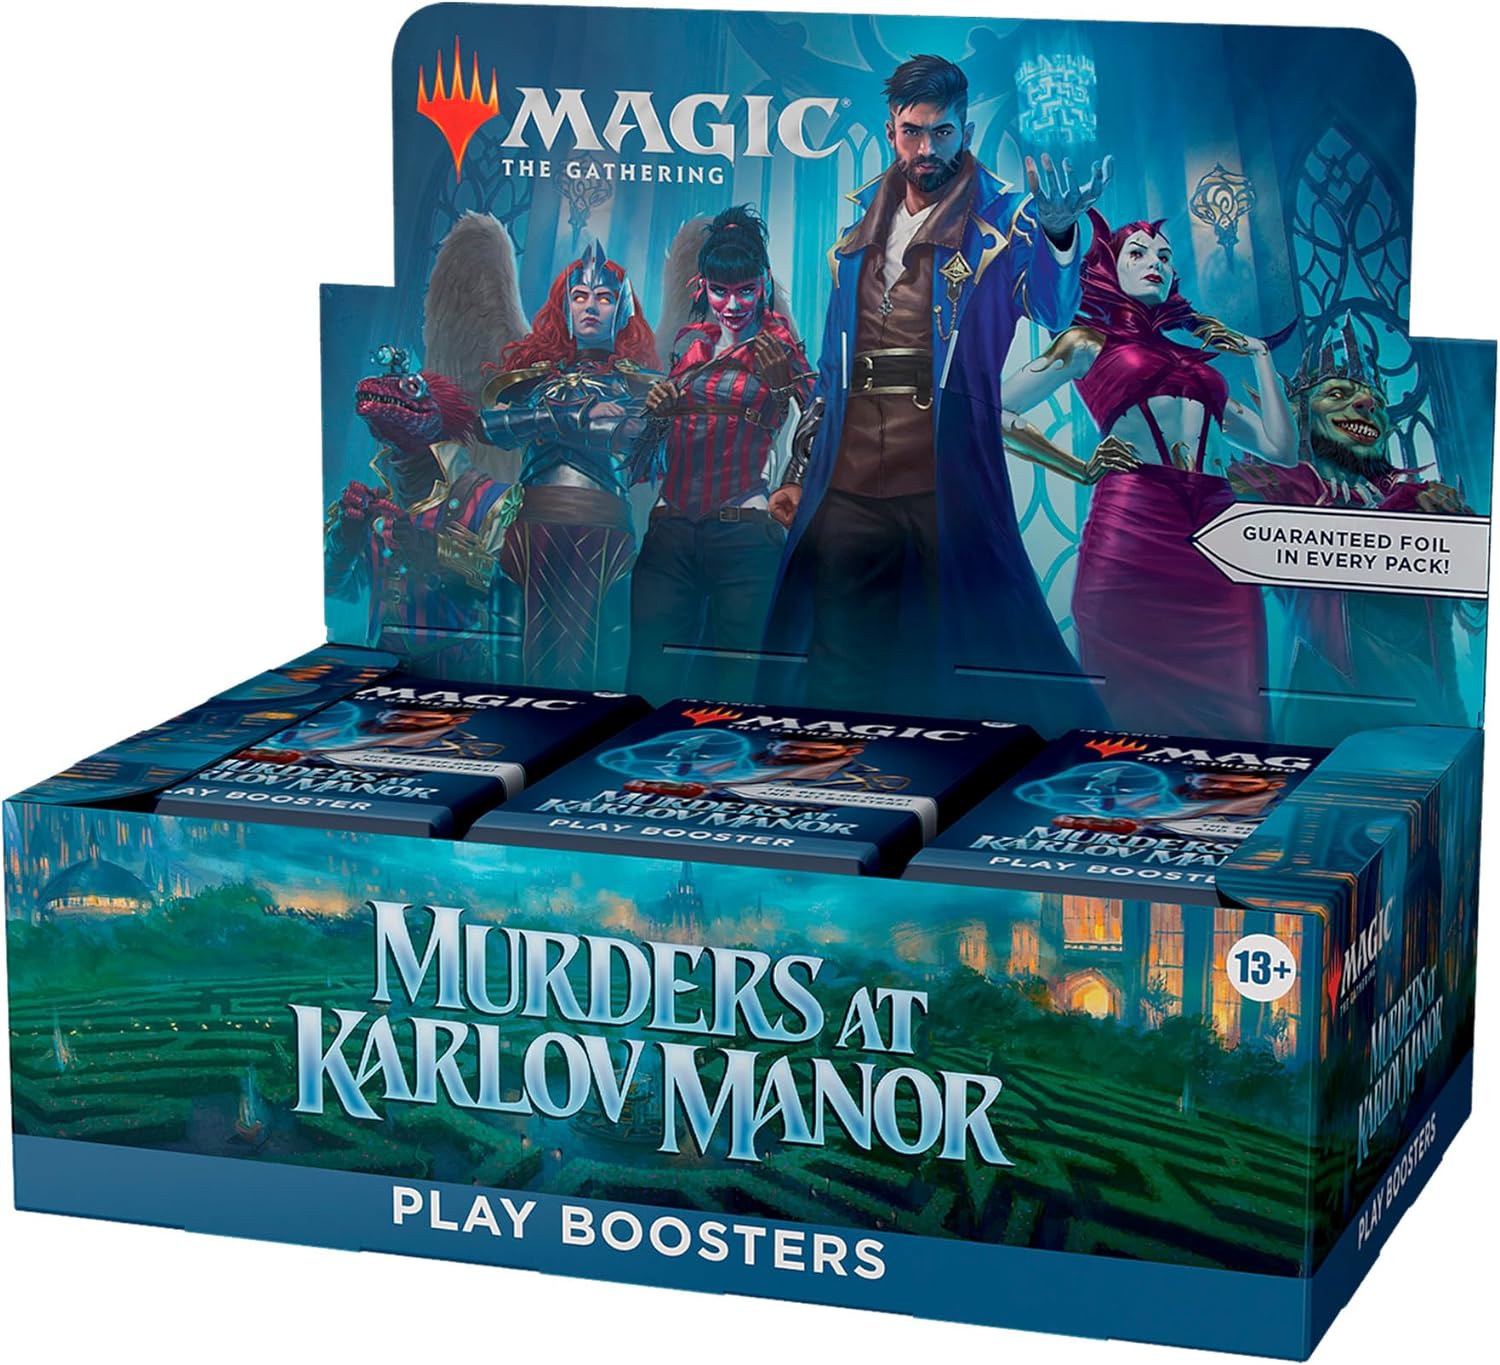 Magic: The Gathering Murders at Karlov Manor Play Booster Box | CCGPrime